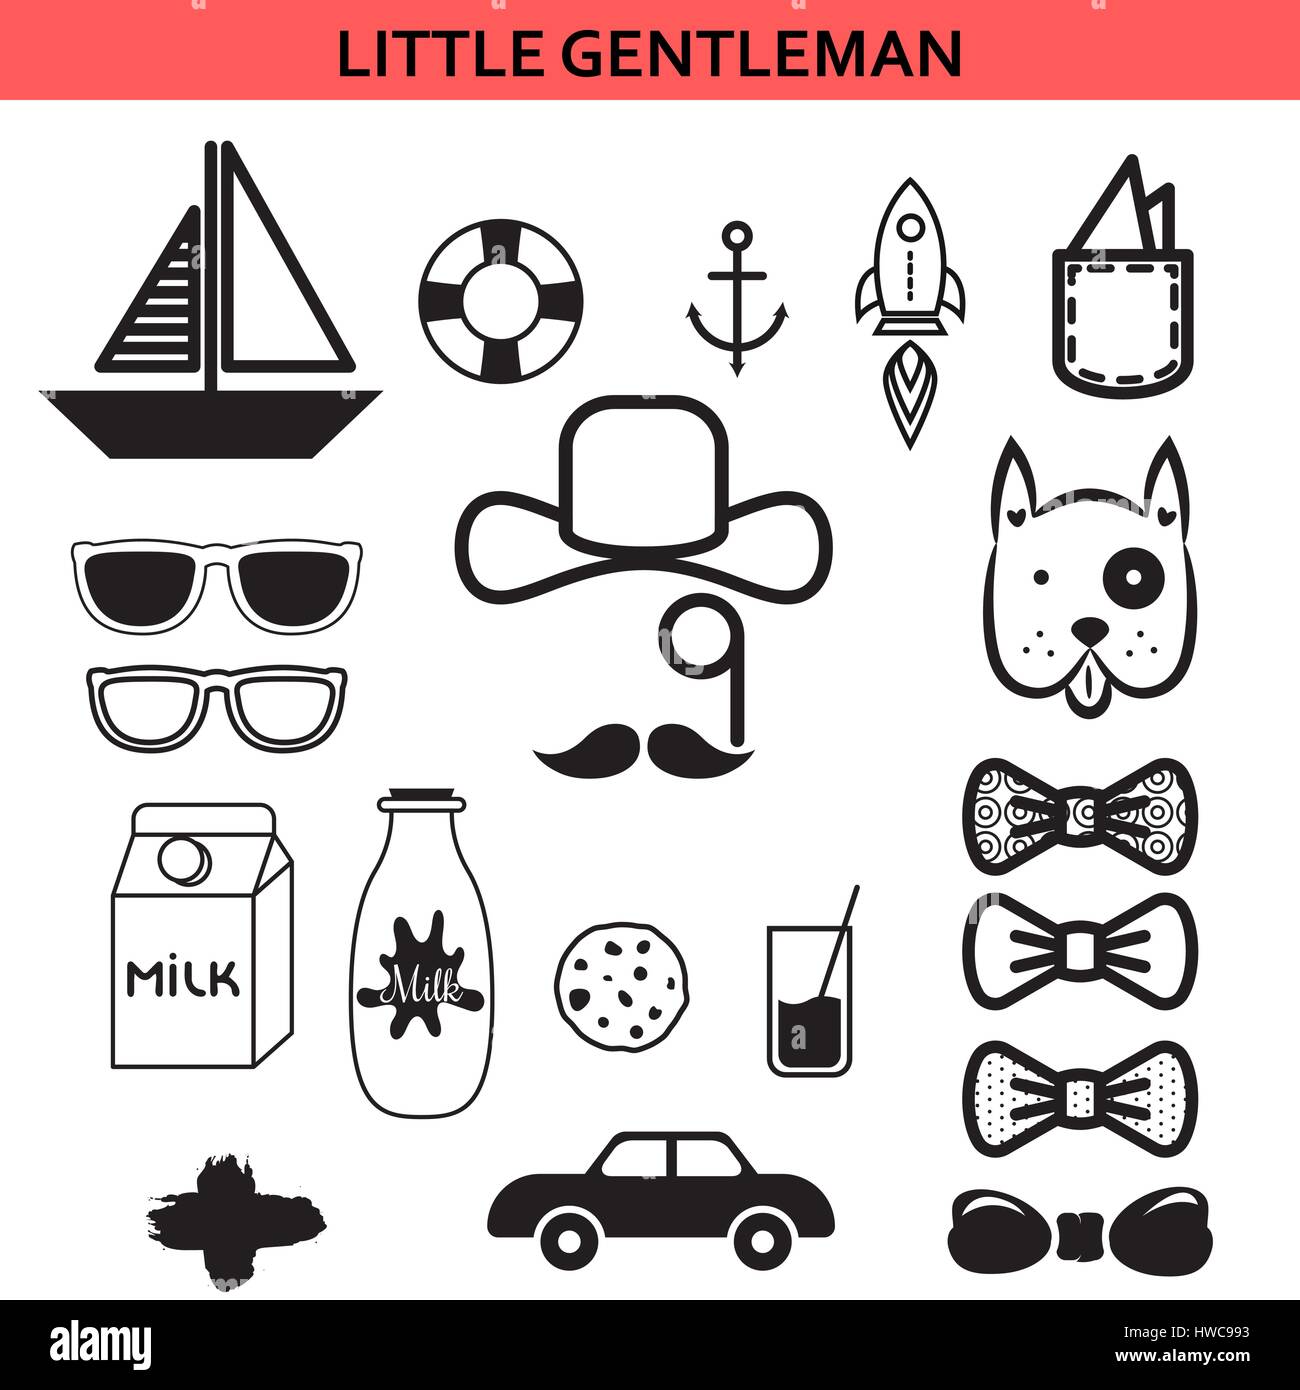 Little gentleman outline black vector icons. Boy prop elements for apparel, toys, cards design isolated on white. Stock Vector